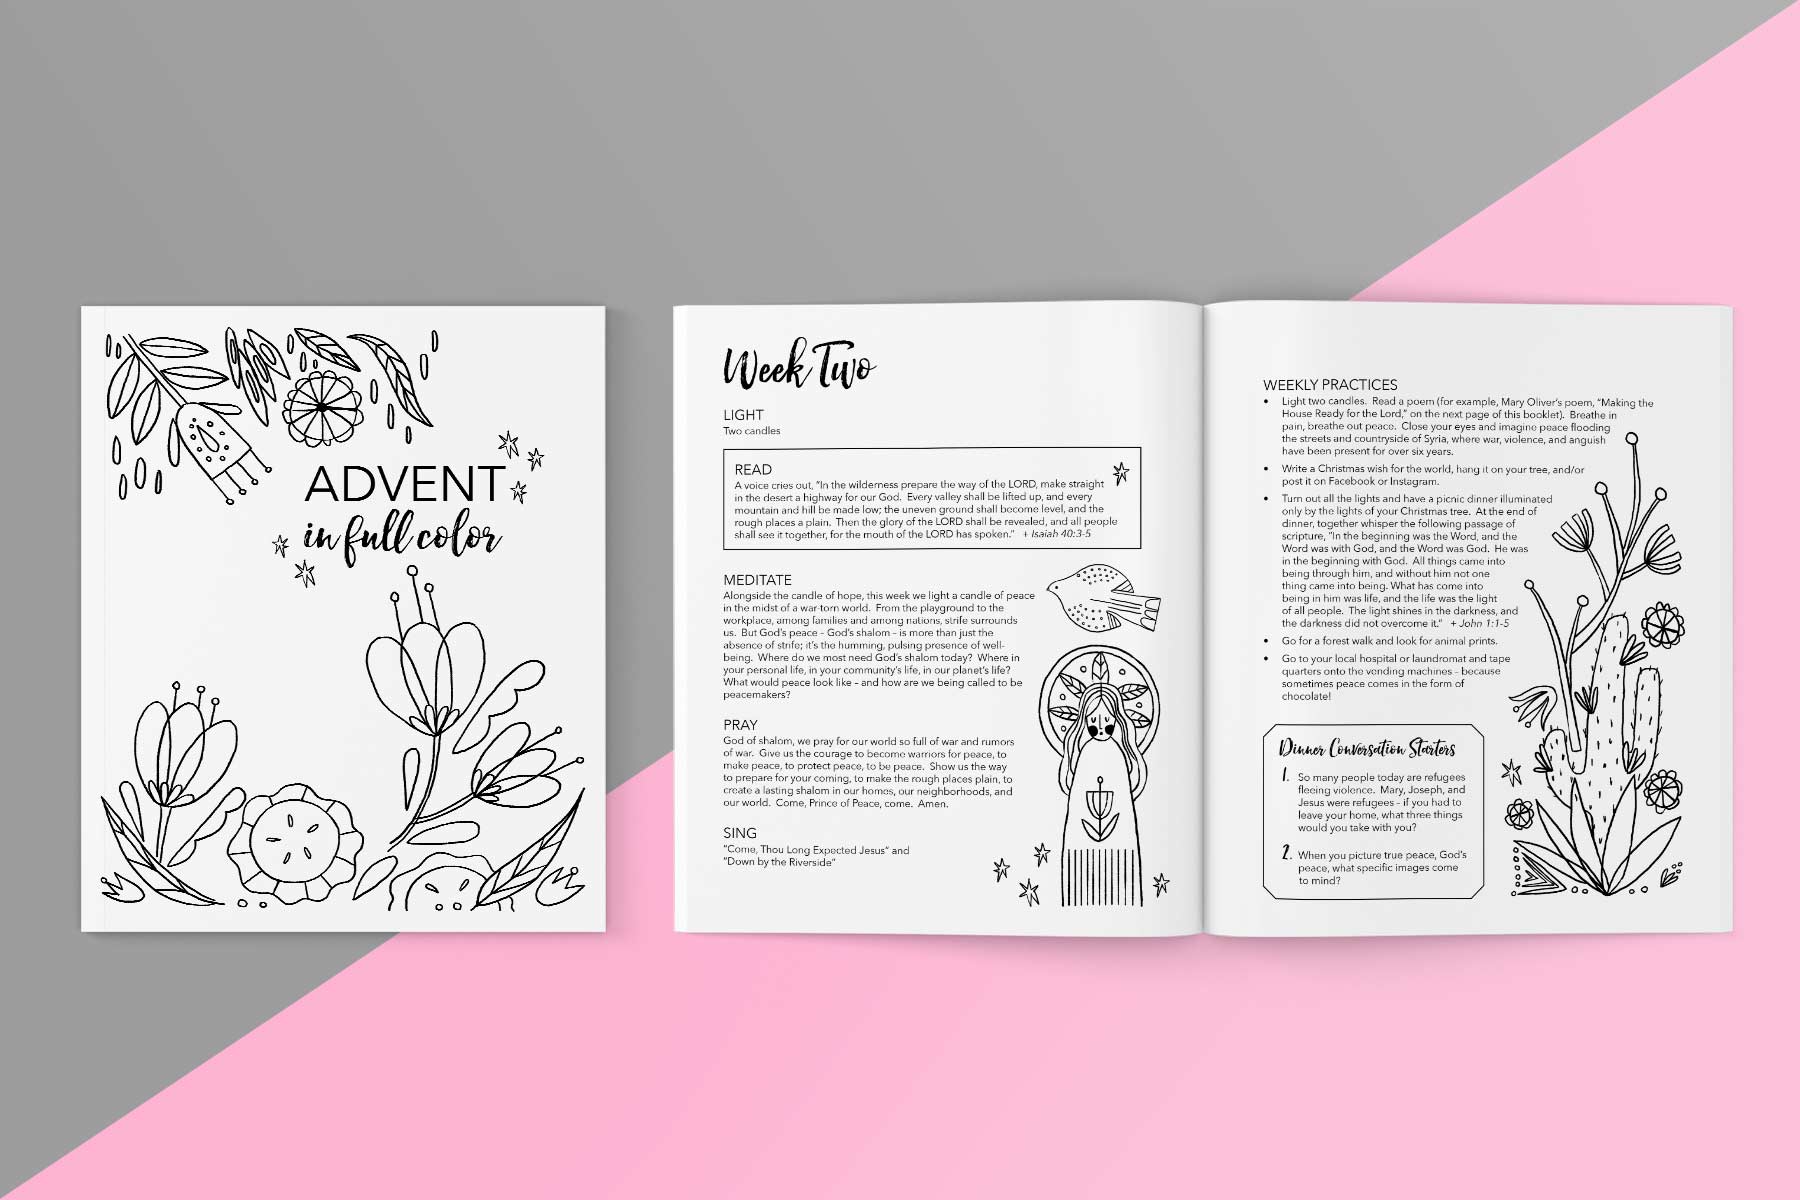 Be Still and Know: A Devotional Coloring Book